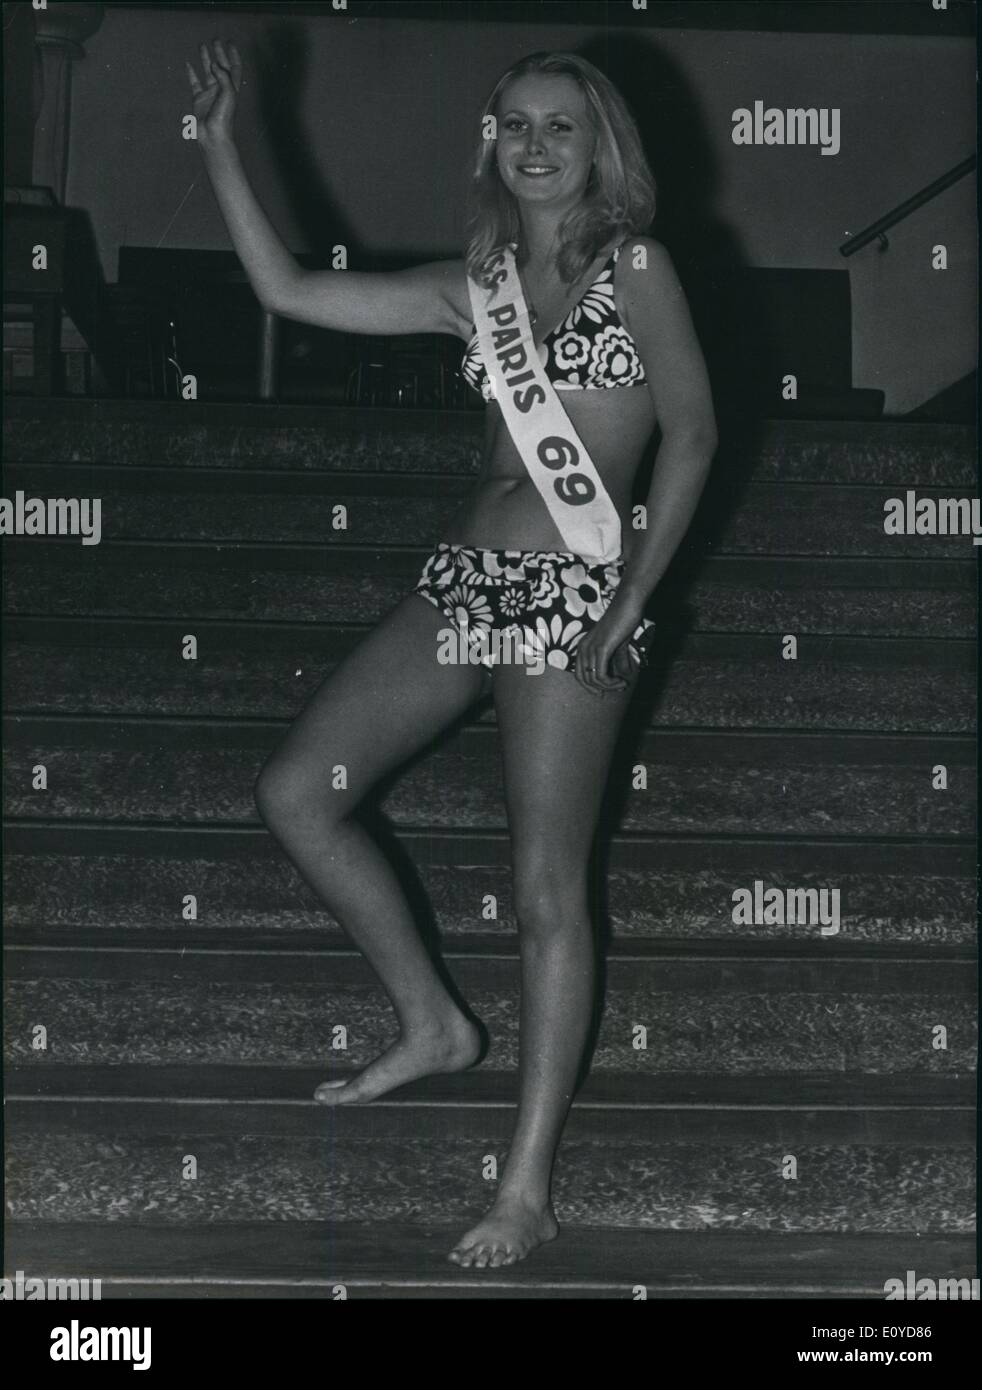 Apr. 16, 1968 - Introducing Miss Majorette: 19-year-old fashion model from  nice Marie Ange Brillet was elected miss Majorettes during the Majorettes  festival held on the Riviera on Easter Sunday. Photo shows